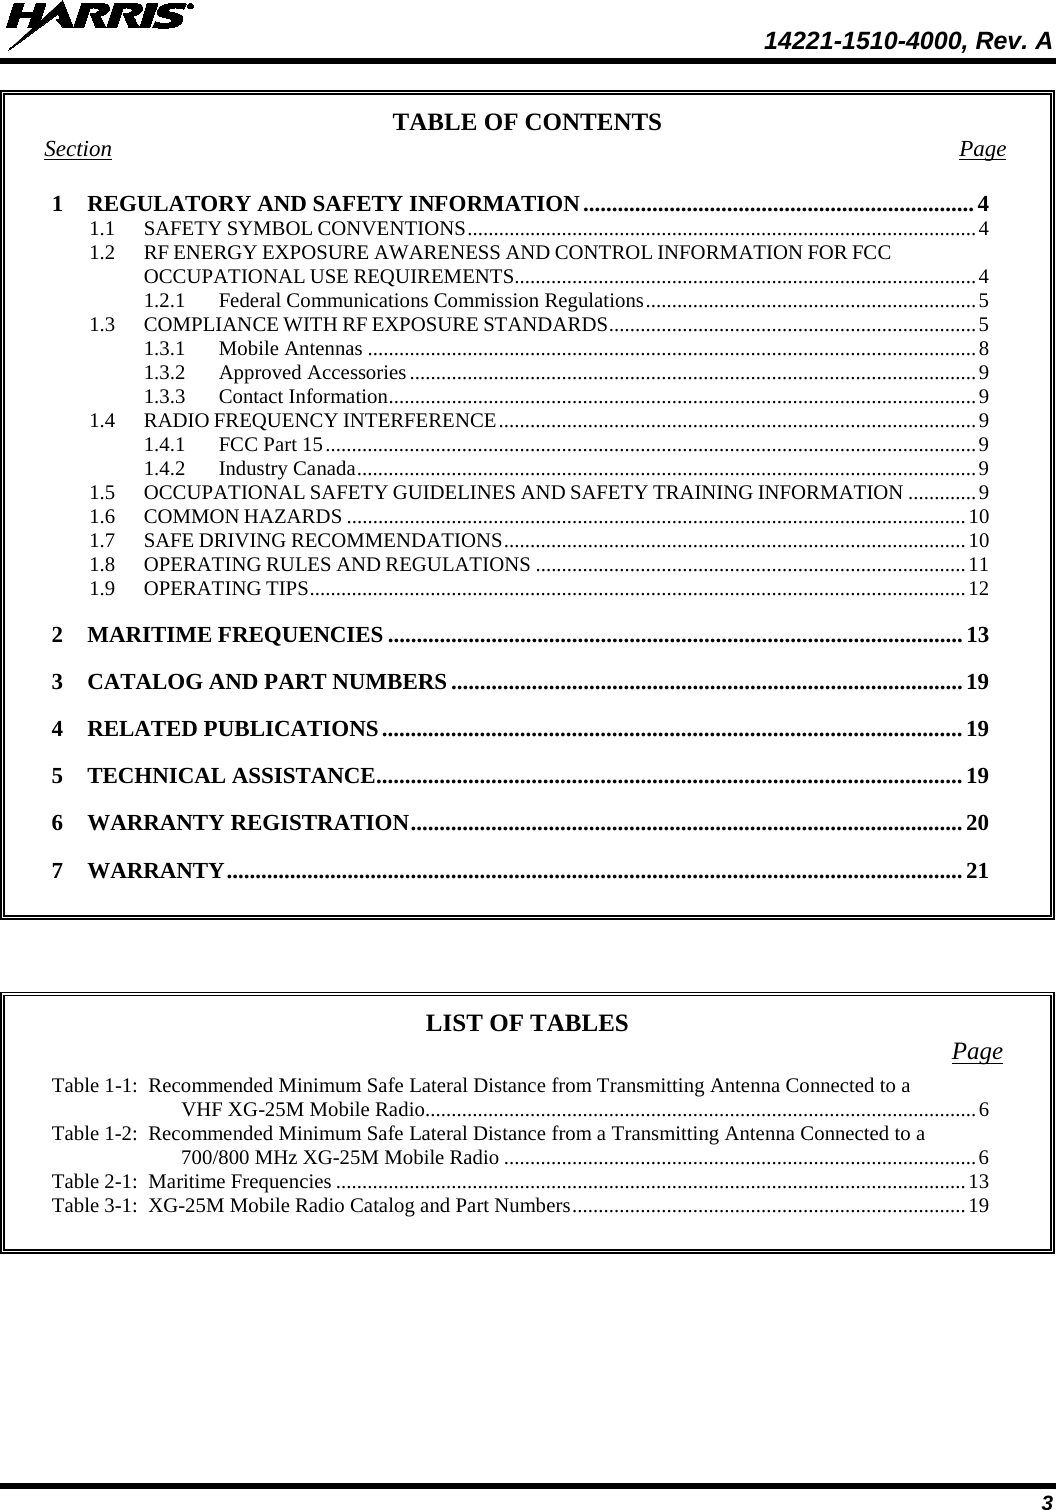  14221-1510-4000, Rev. A 3 TABLE OF CONTENTS Section  Page 1 REGULATORY AND SAFETY INFORMATION .................................................................... 4 1.1 SAFETY SYMBOL CONVENTIONS ................................................................................................. 4 1.2 RF ENERGY EXPOSURE AWARENESS AND CONTROL INFORMATION FOR FCC OCCUPATIONAL USE REQUIREMENTS........................................................................................ 4 1.2.1 Federal Communications Commission Regulations ............................................................... 5 1.3 COMPLIANCE WITH RF EXPOSURE STANDARDS ...................................................................... 5 1.3.1 Mobile Antennas .................................................................................................................... 8 1.3.2 Approved Accessories ............................................................................................................ 9 1.3.3 Contact Information ................................................................................................................ 9 1.4 RADIO FREQUENCY INTERFERENCE ........................................................................................... 9 1.4.1 FCC Part 15 ............................................................................................................................ 9 1.4.2 Industry Canada ...................................................................................................................... 9 1.5 OCCUPATIONAL SAFETY GUIDELINES AND SAFETY TRAINING INFORMATION ............. 9 1.6 COMMON HAZARDS ...................................................................................................................... 10 1.7 SAFE DRIVING RECOMMENDATIONS ........................................................................................ 10 1.8 OPERATING RULES AND REGULATIONS .................................................................................. 11 1.9 OPERATING TIPS ............................................................................................................................. 12 2 MARITIME FREQUENCIES .................................................................................................... 13 3 CATALOG AND PART NUMBERS ......................................................................................... 19 4 RELATED PUBLICATIONS ..................................................................................................... 19 5 TECHNICAL ASSISTANCE ...................................................................................................... 19 6 WARRANTY REGISTRATION ................................................................................................ 20 7 WARRANTY ................................................................................................................................ 21       LIST OF TABLES Page Table 1-1:  Recommended Minimum Safe Lateral Distance from Transmitting Antenna Connected to a VHF XG-25M Mobile Radio ......................................................................................................... 6 Table 1-2:  Recommended Minimum Safe Lateral Distance from a Transmitting Antenna Connected to a 700/800 MHz XG-25M Mobile Radio .......................................................................................... 6 Table 2-1:  Maritime Frequencies ........................................................................................................................ 13 Table 3-1:  XG-25M Mobile Radio Catalog and Part Numbers ........................................................................... 19    